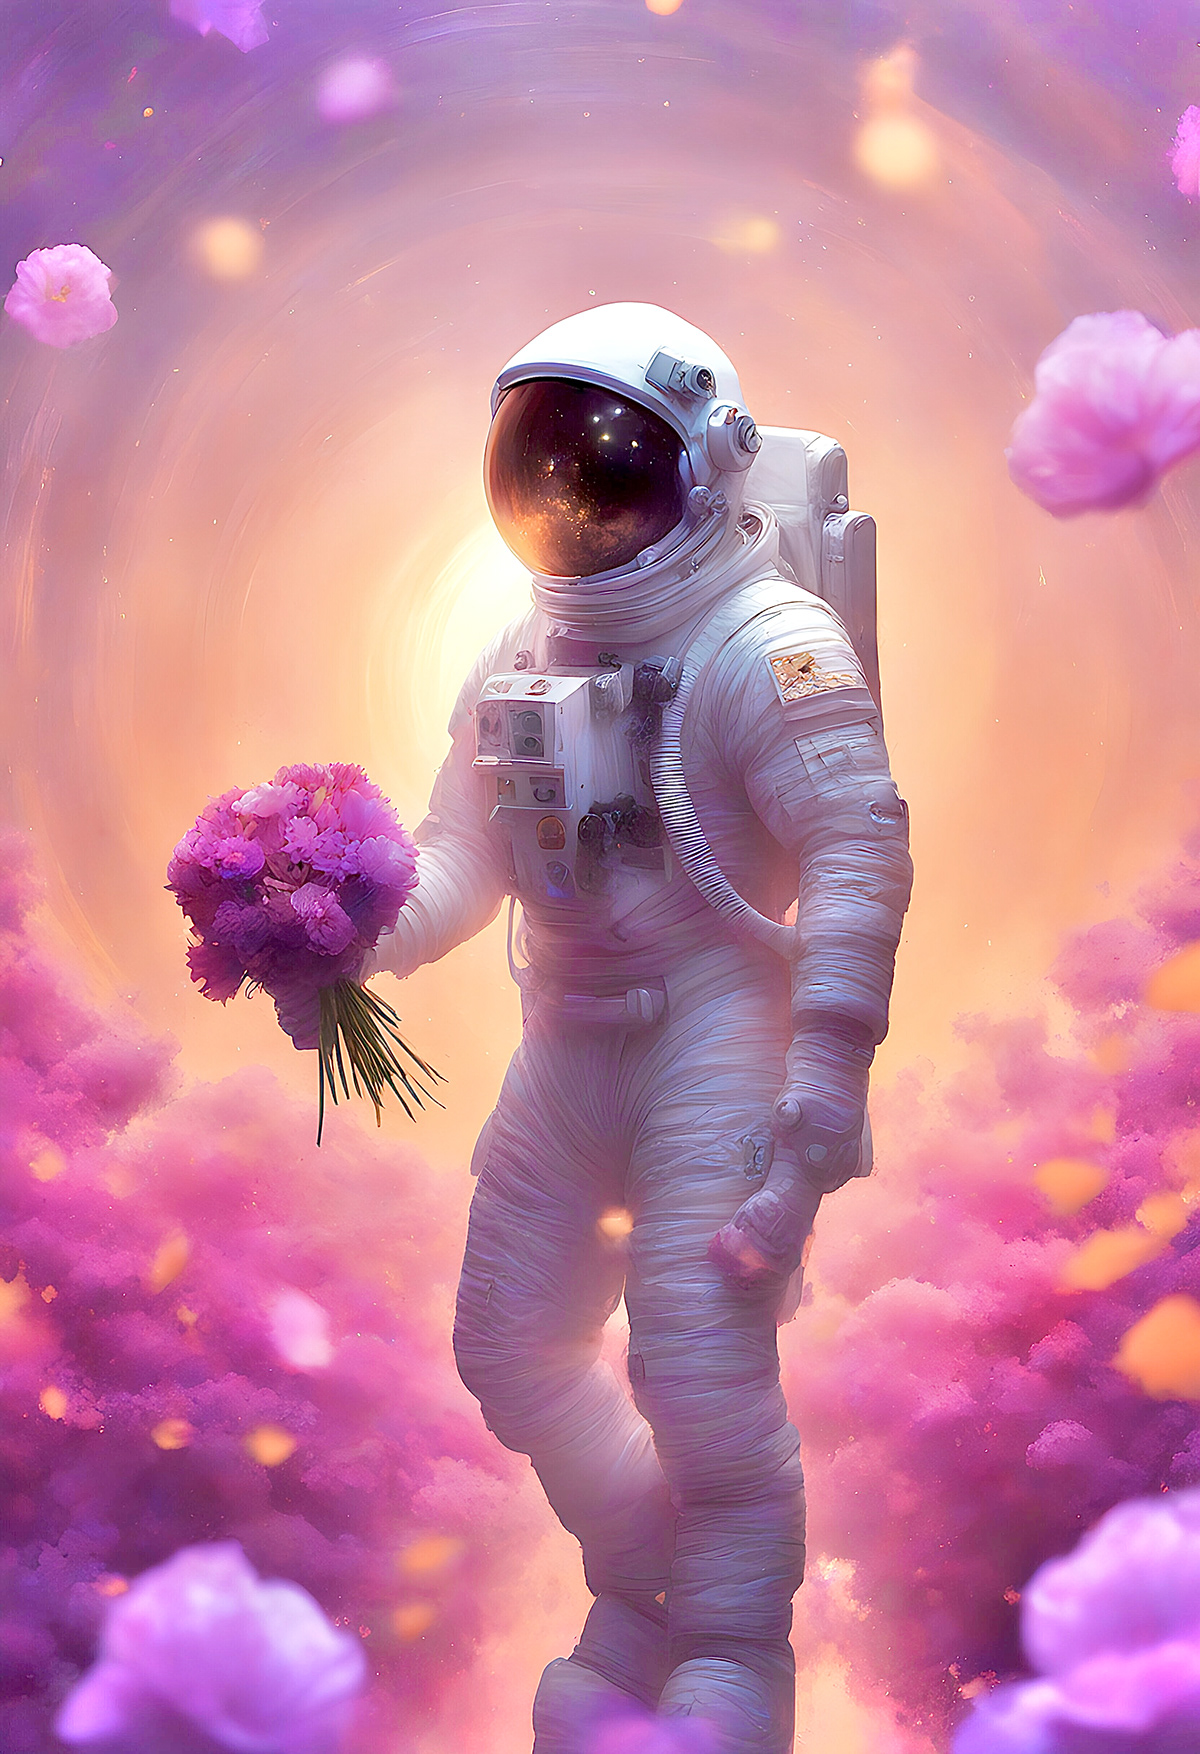 Synthwave retrowave astronaut Flowers dream anxiety Insomnia depression Schizophrenia bipolar mental health mental illness ai Ai Art aiart space travel alien world dreamscape AI assisted other world